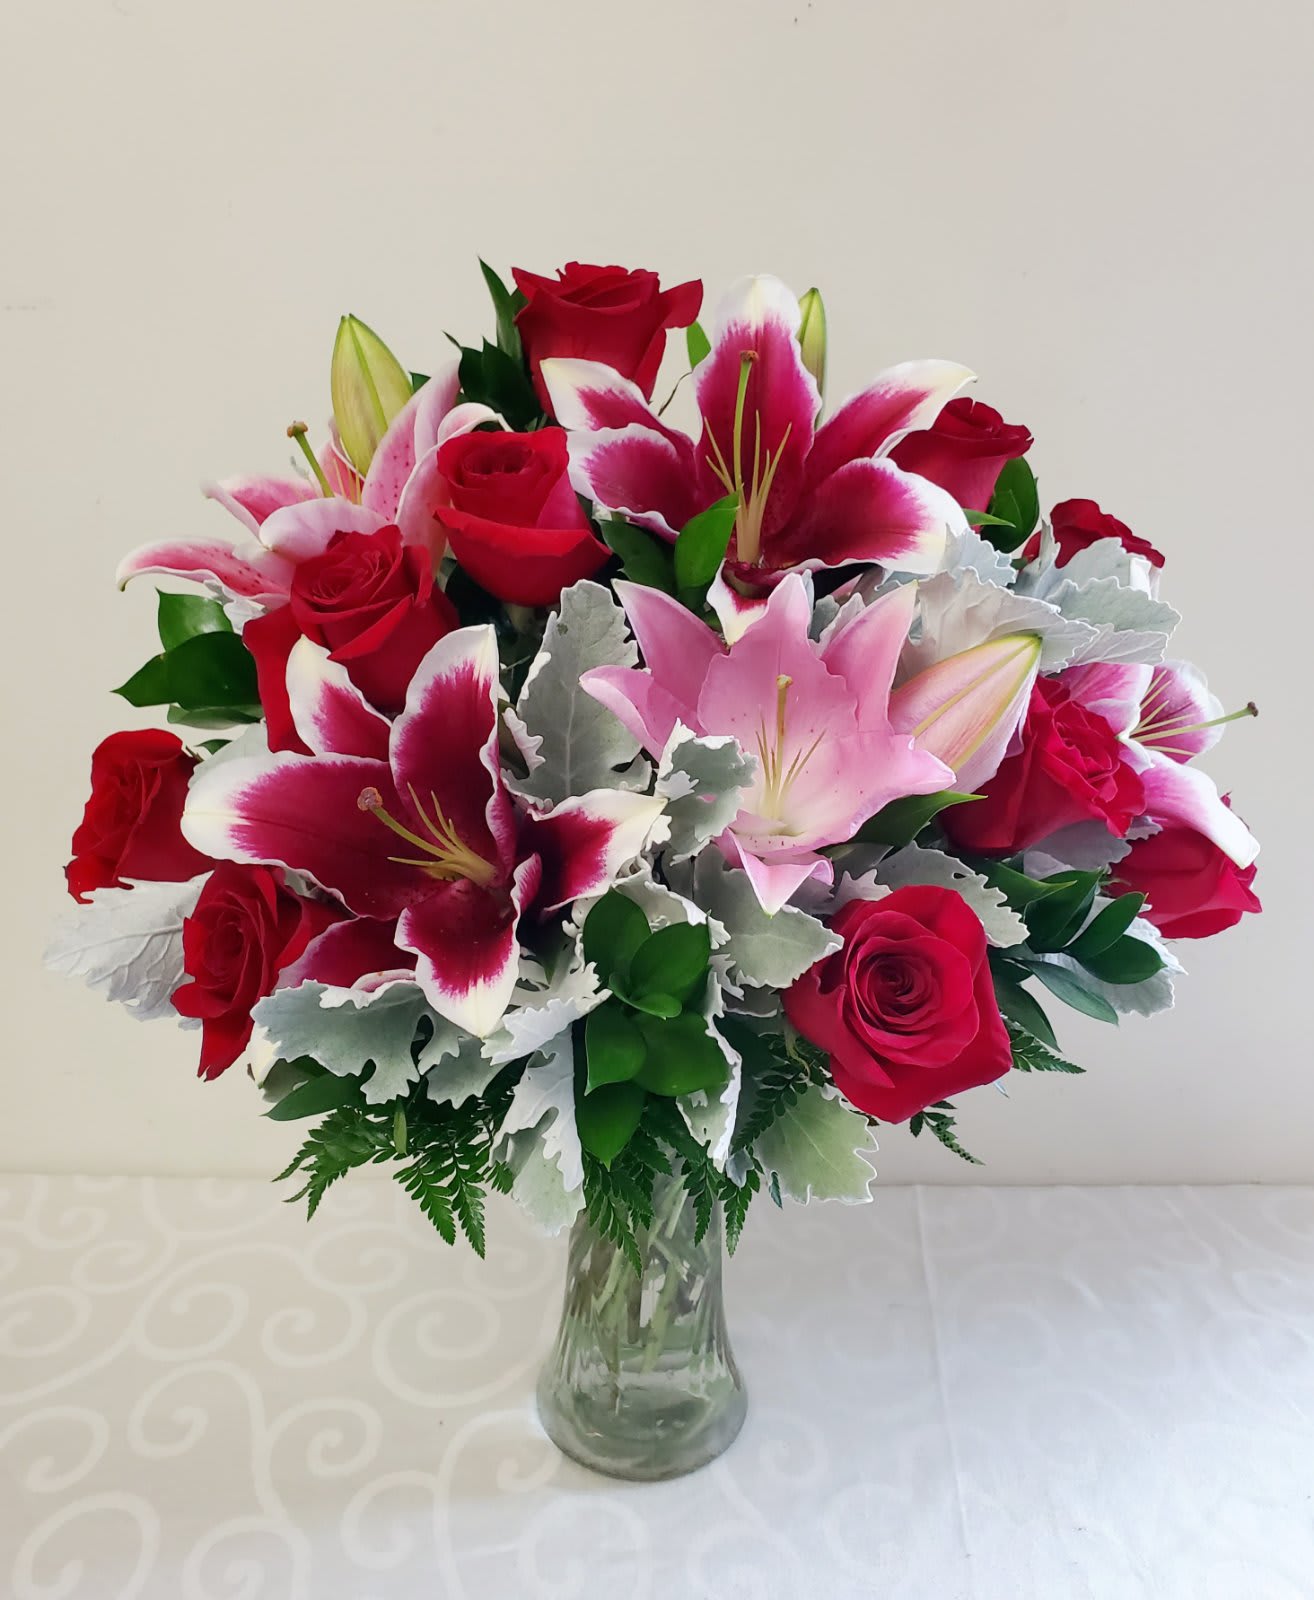 My Gorgeous Star Bouquet | Approximately 22H by 18W - 1 Dozen Premium Red Roses  Designed with beautiful Stargazer Lilies Accented with Dusty Miller and Ruscus Leaves.